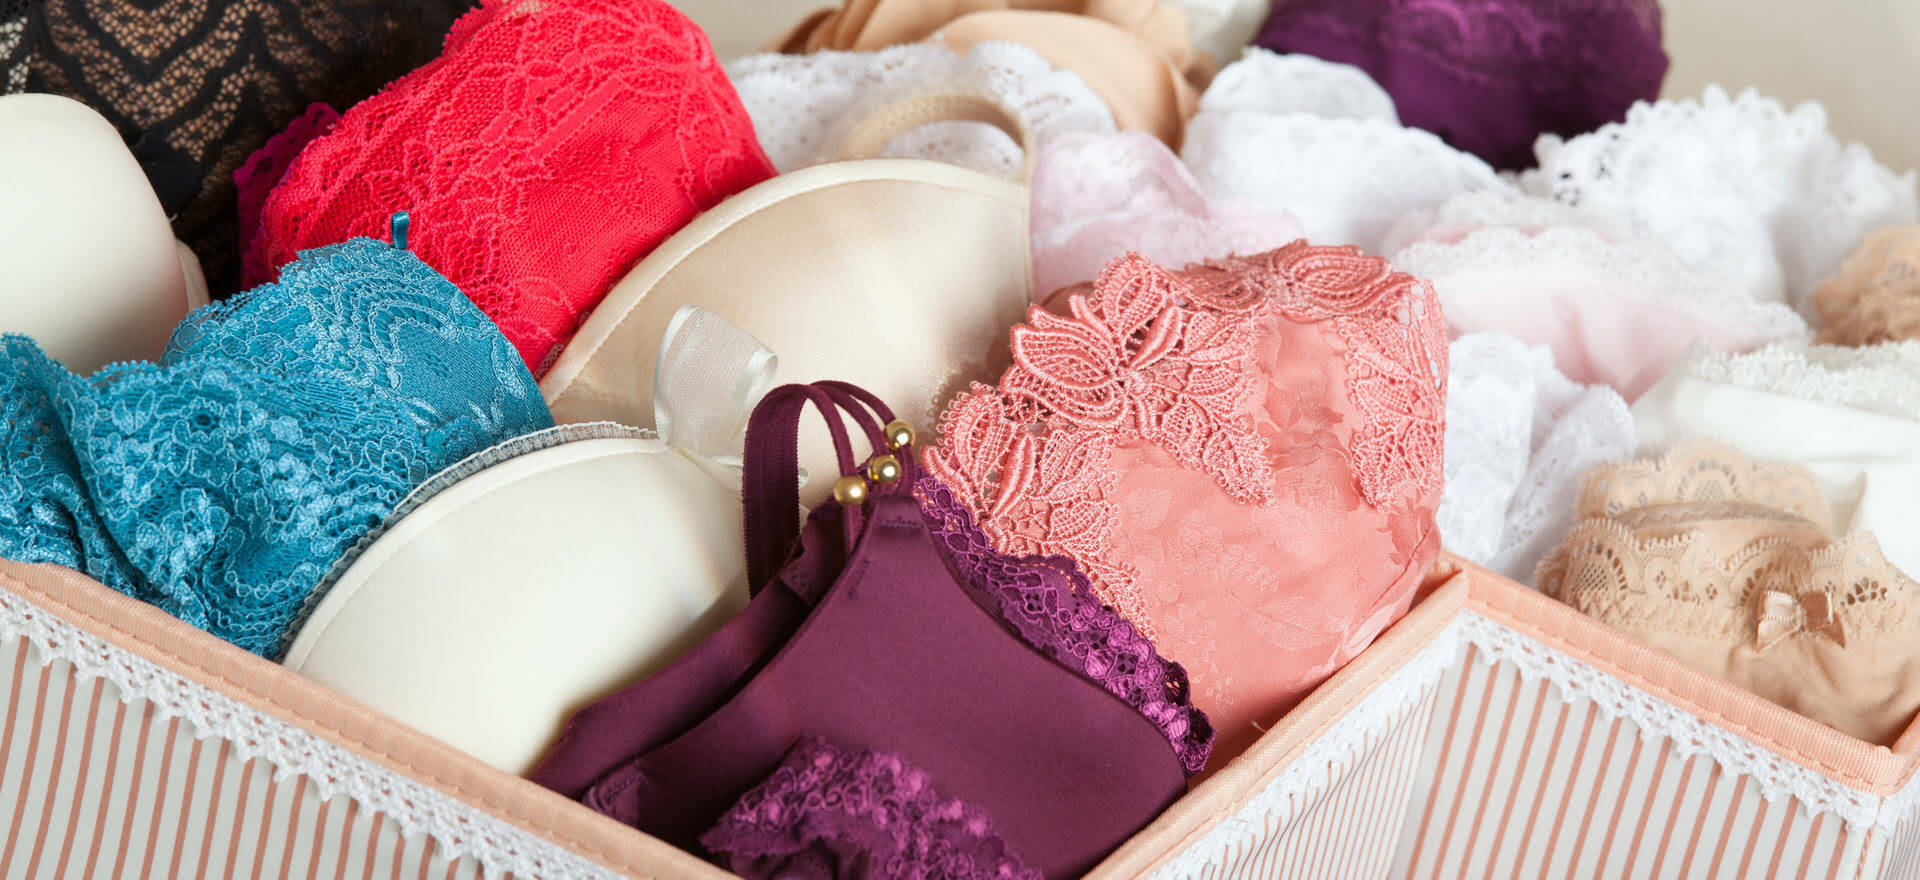 How To Store Lingerie